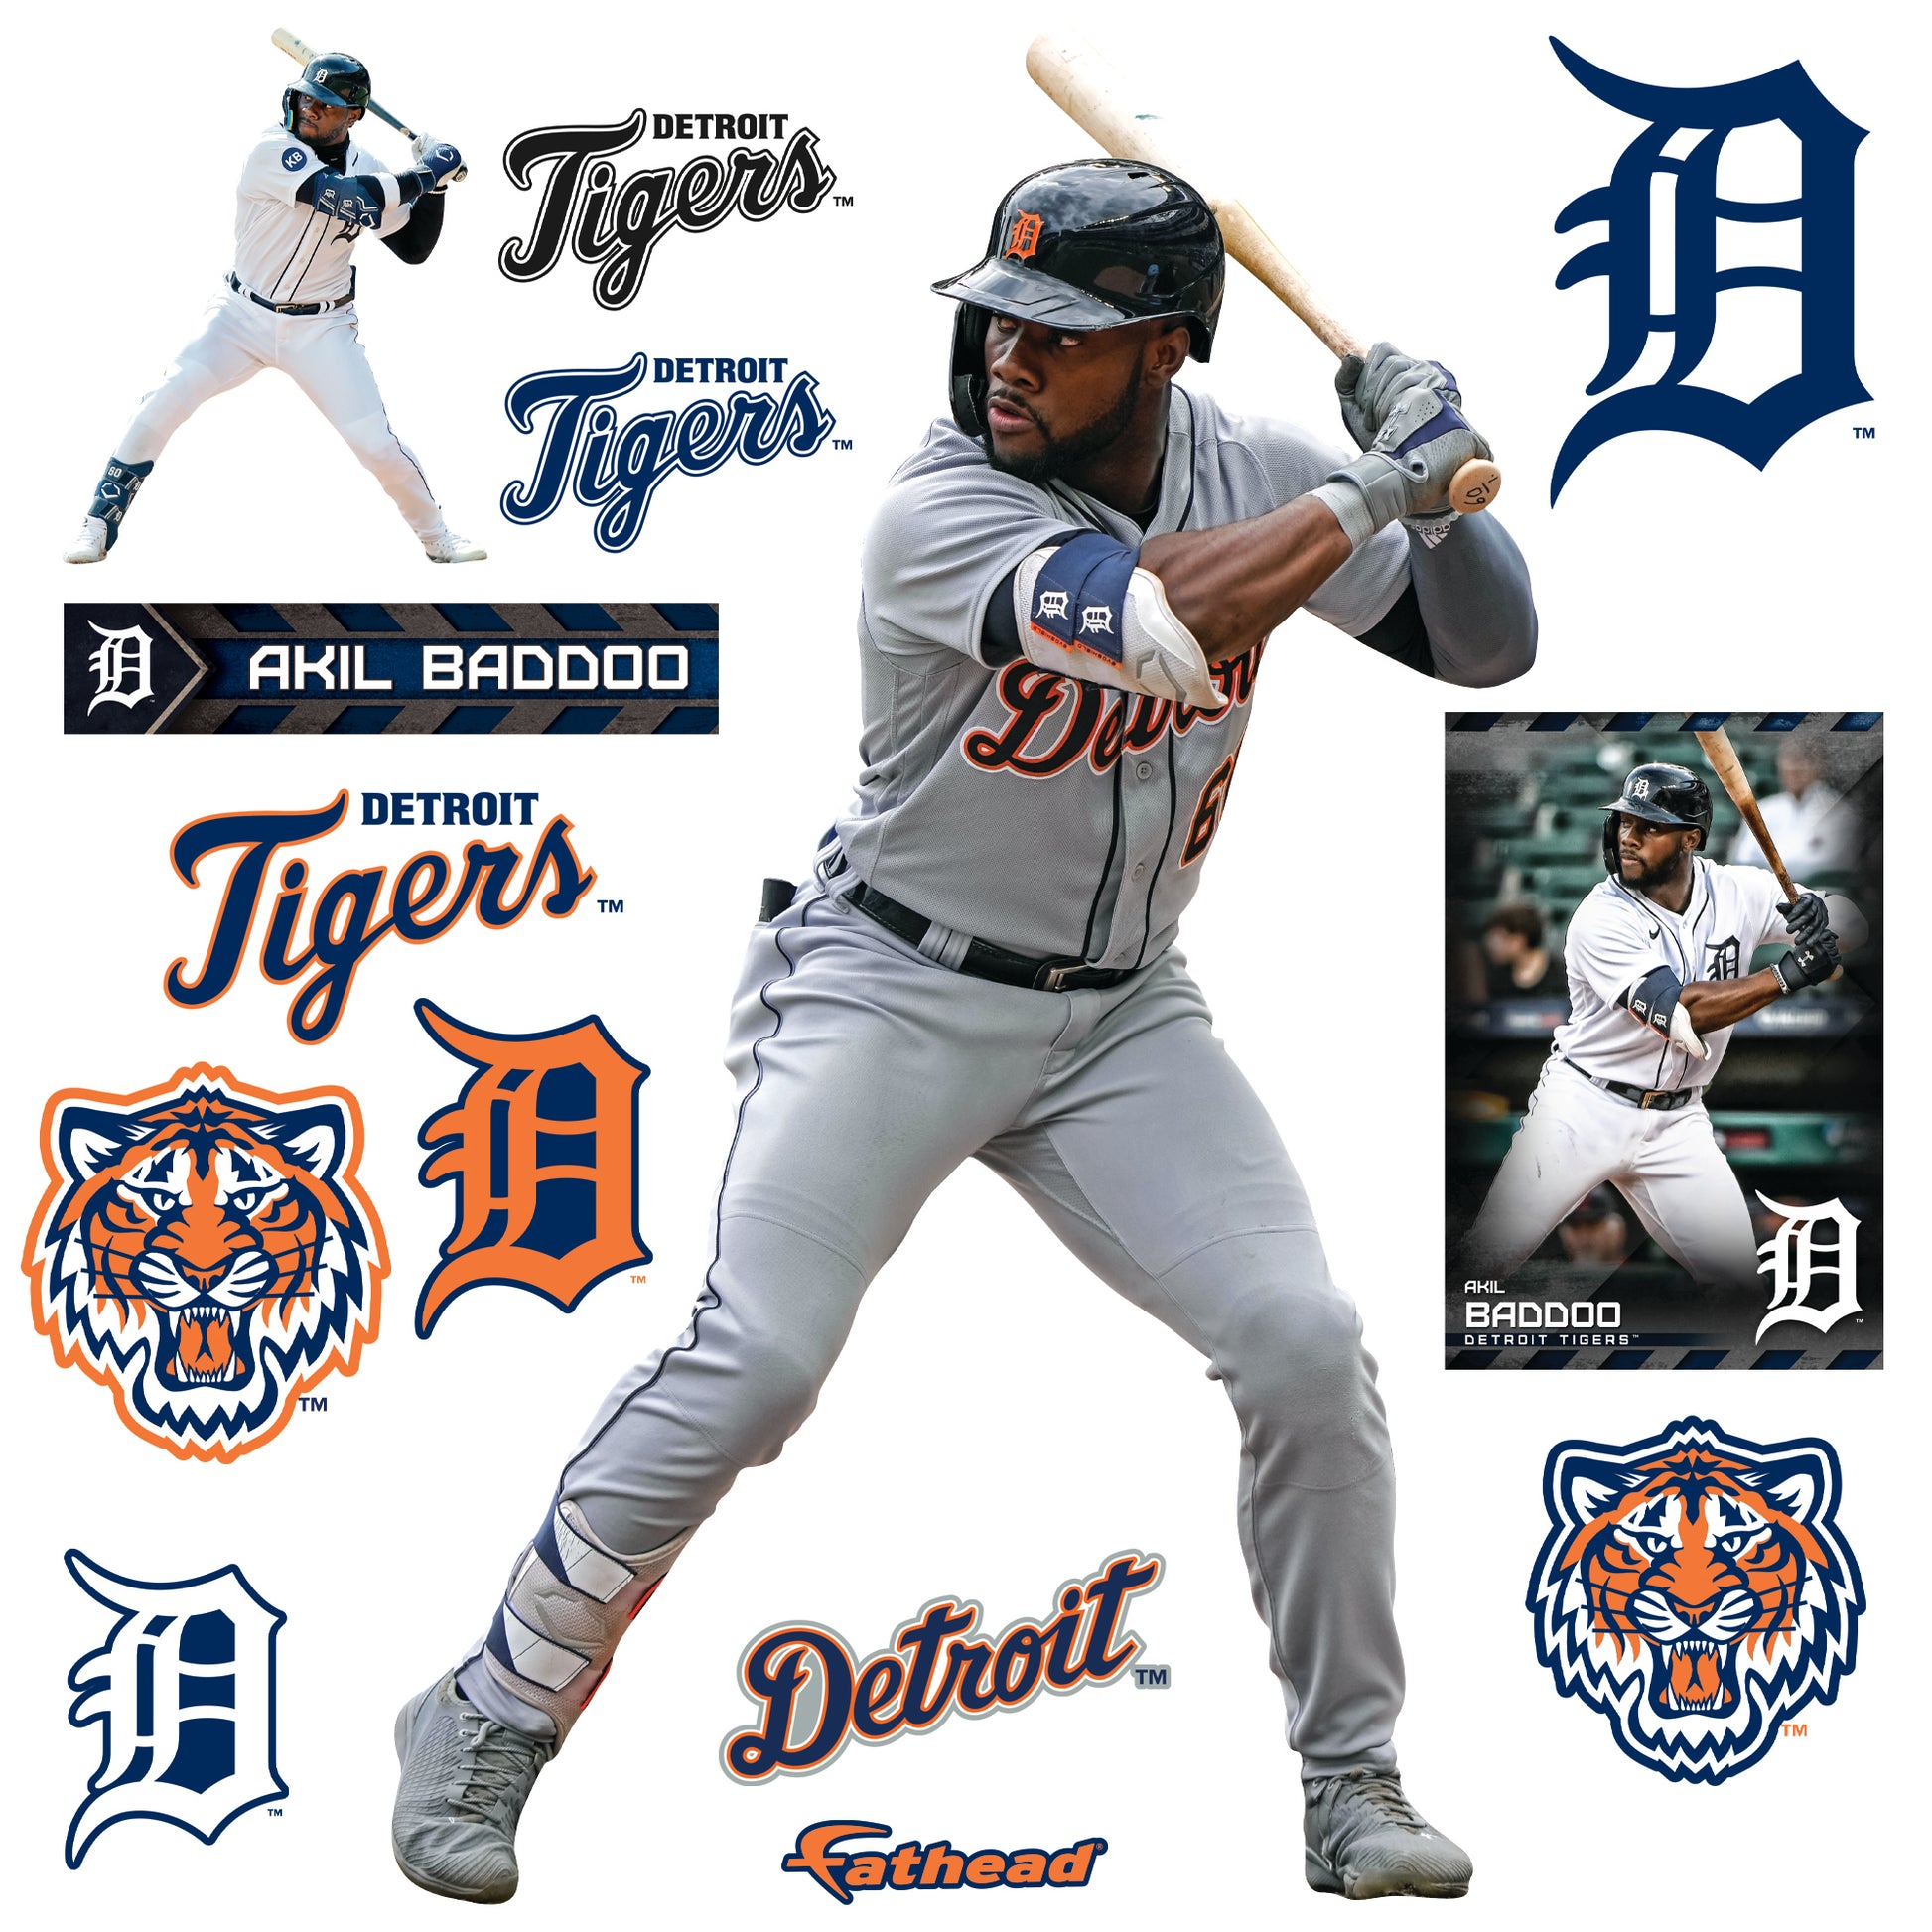 Akil Baddoo has prepared for chance with Detroit Tigers his whole life